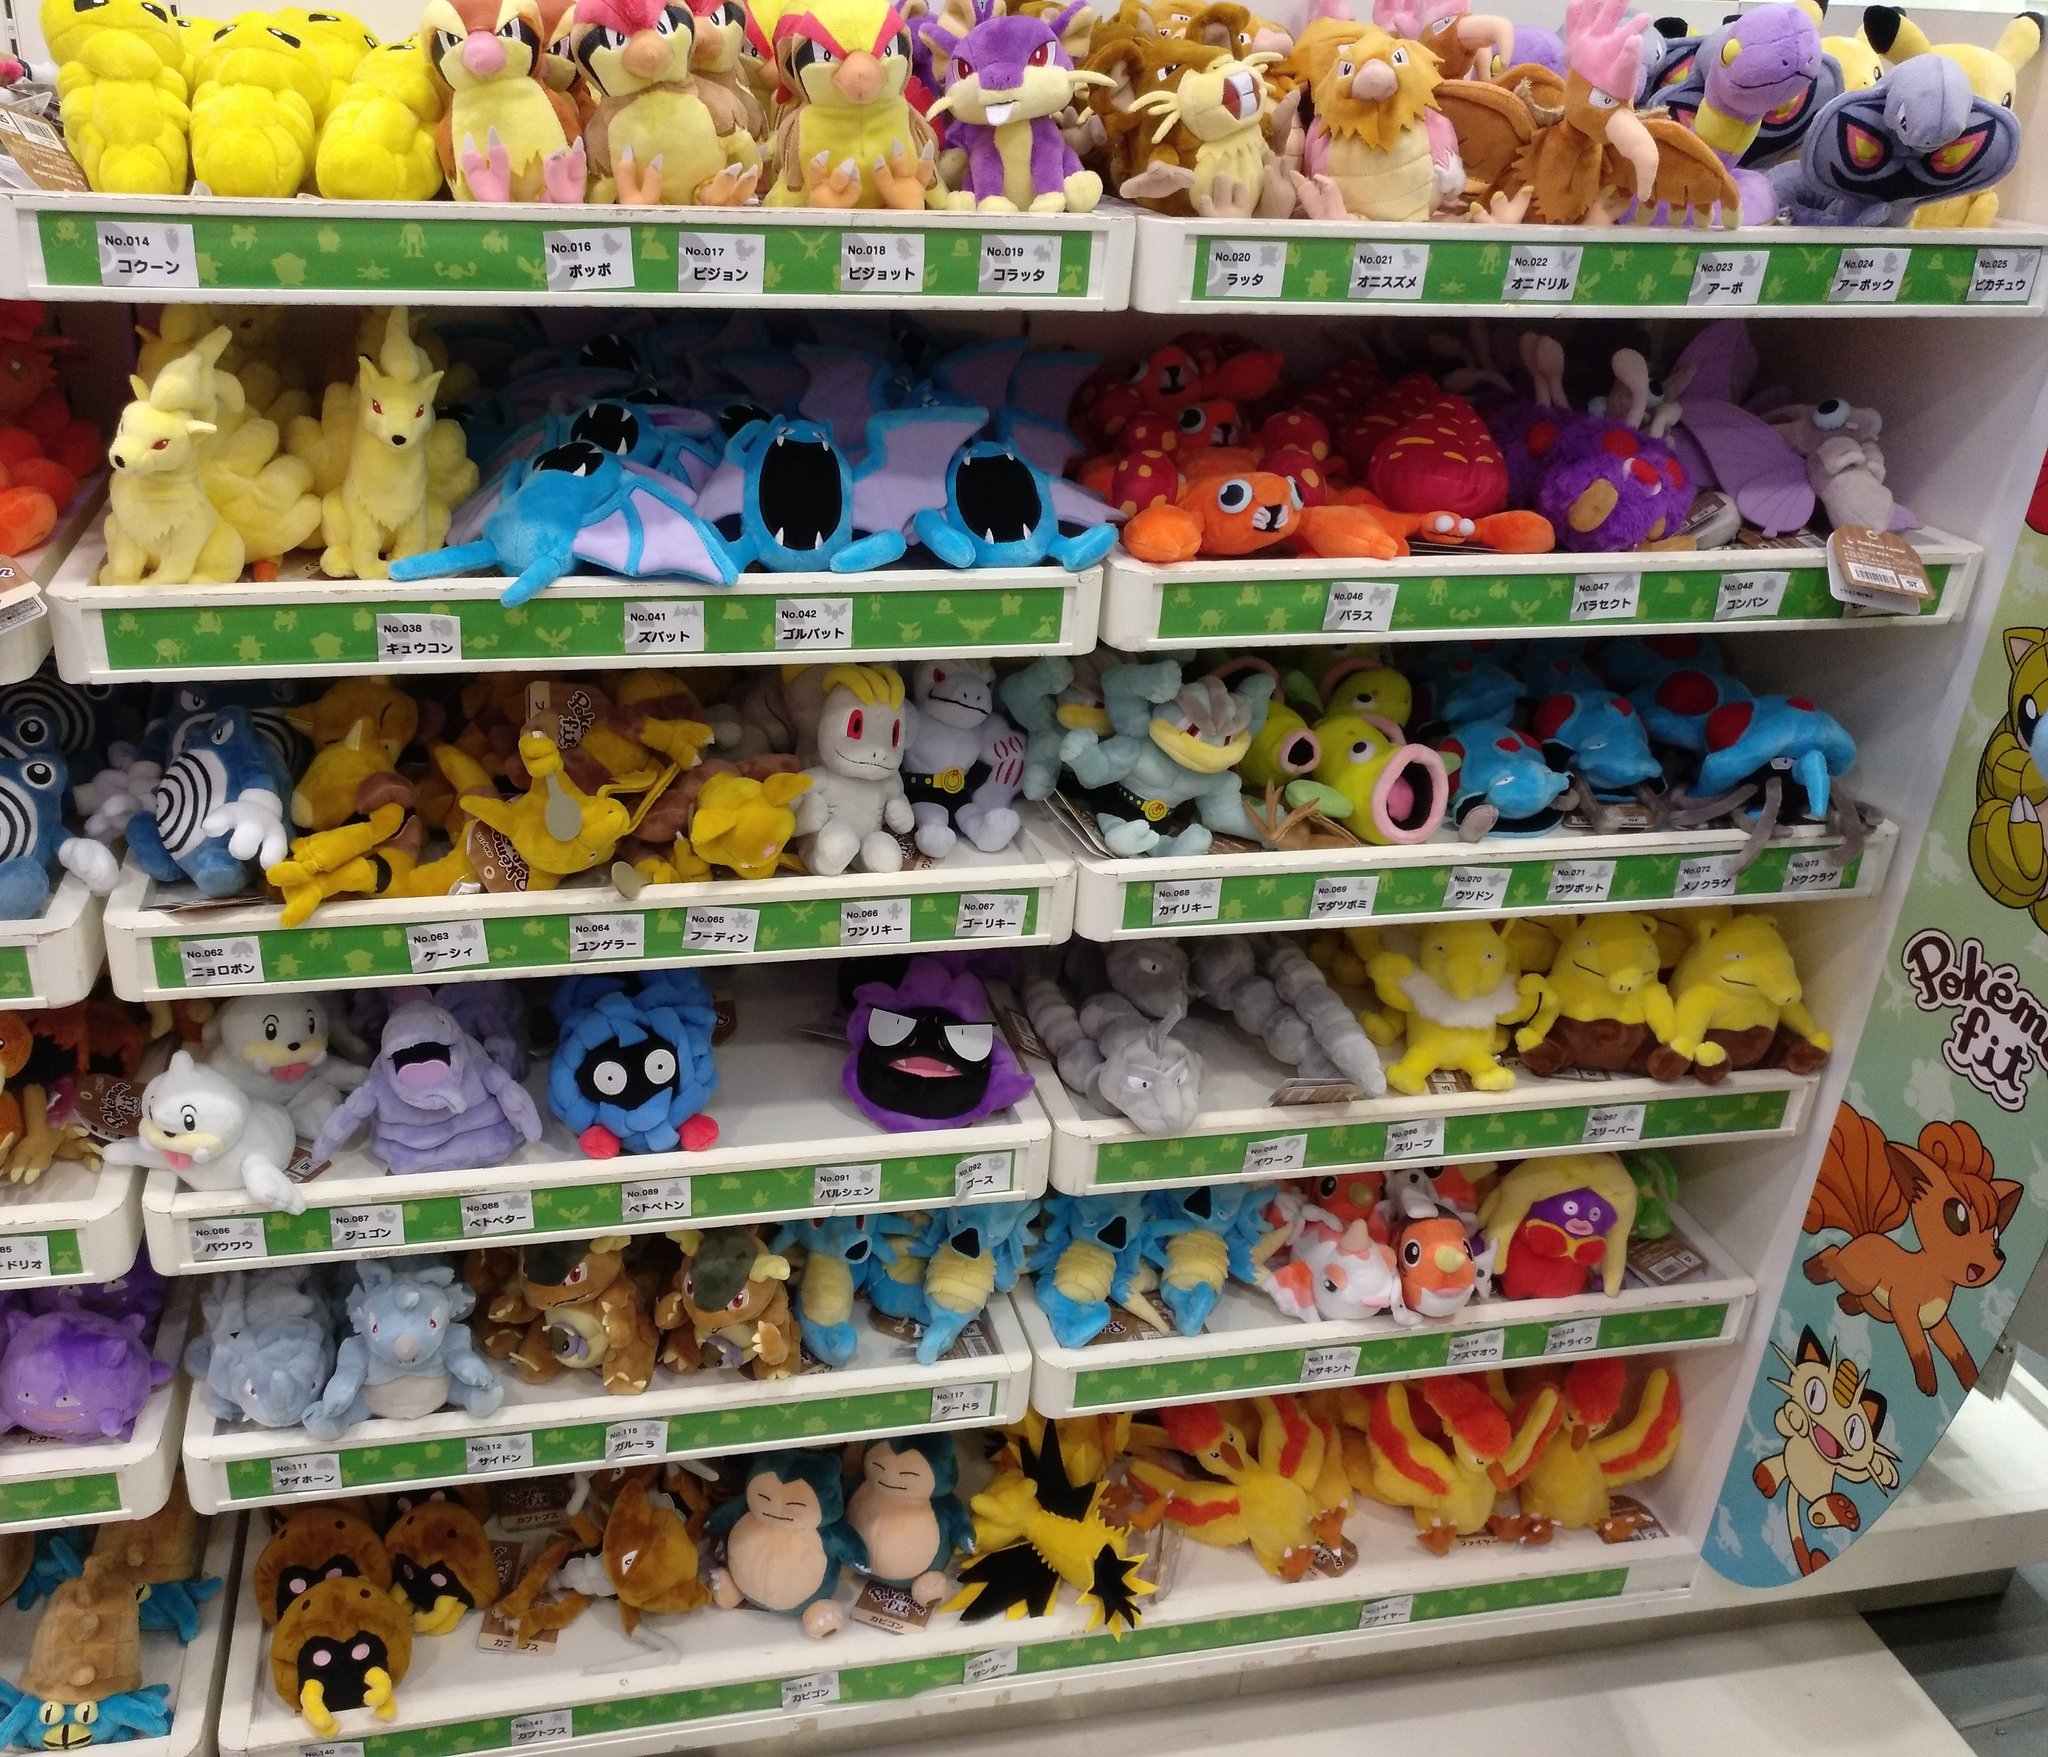 O Xrhsths Benoit Daloze Sto Twitter Found A Real Life Pokemon Center In Fukuoka Not Sure I Ll Get Out In Time For My Flight Gotta Catch All 150 Of Them Rubykaigi T Co M2nzwe7lpe